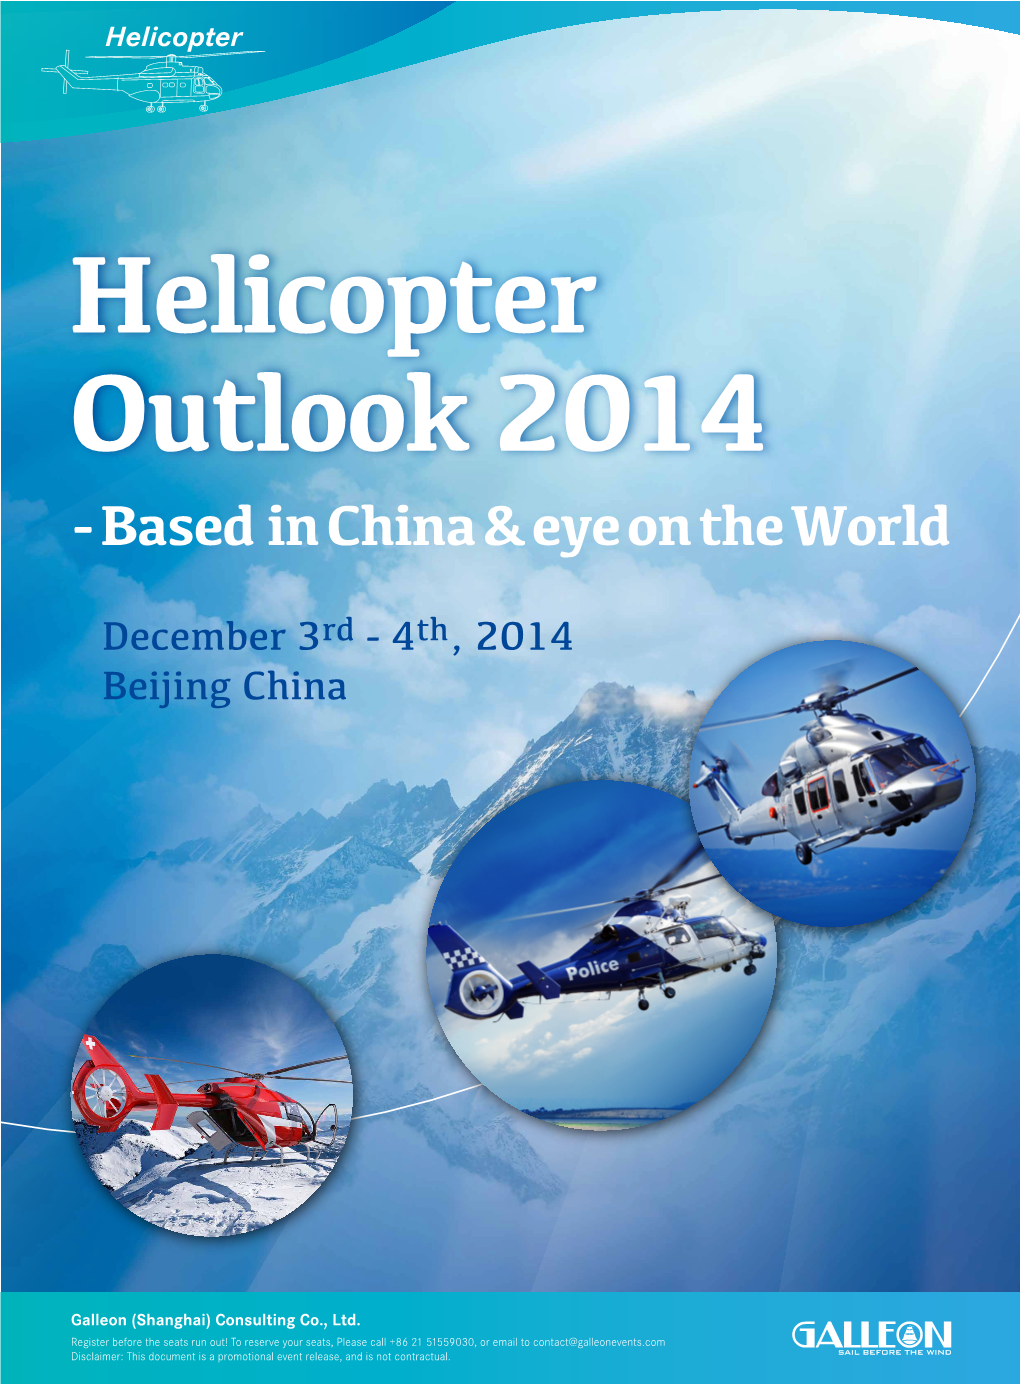 Helicopter Outlook 2014 -Based in China & Eye on the World